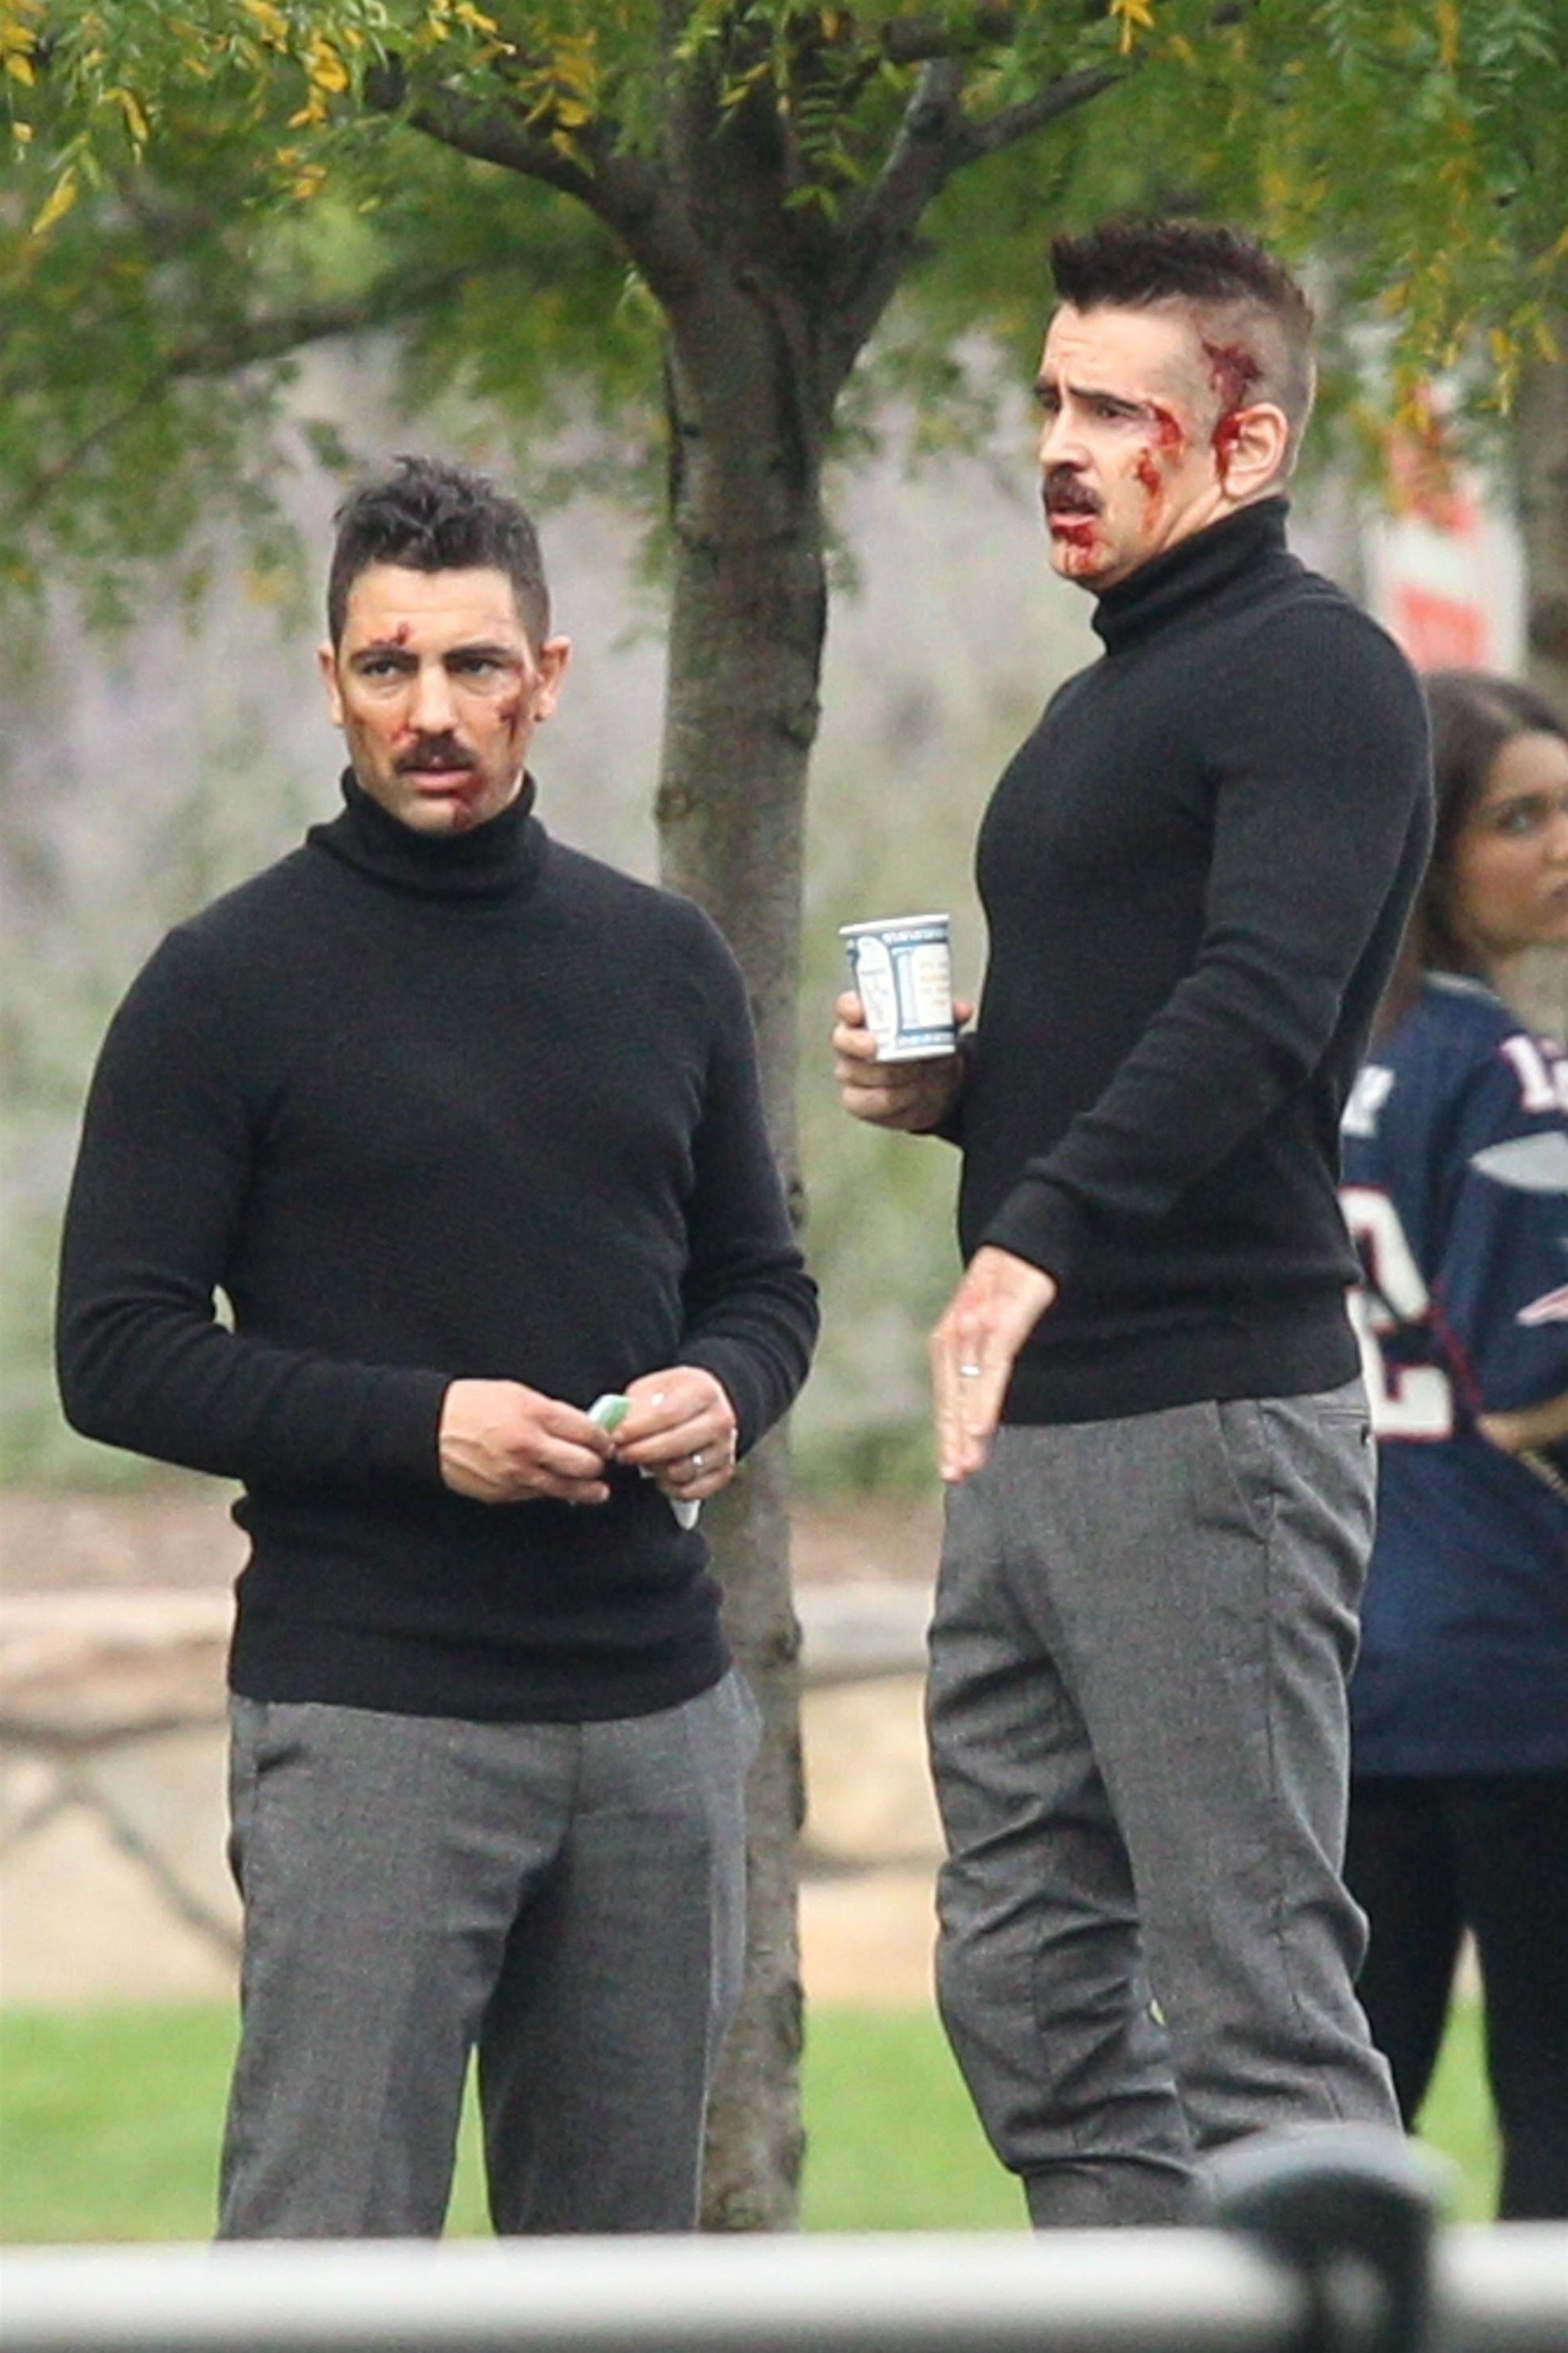 Colin and his body double with bloody marks on their faces and wearing turtlenecks